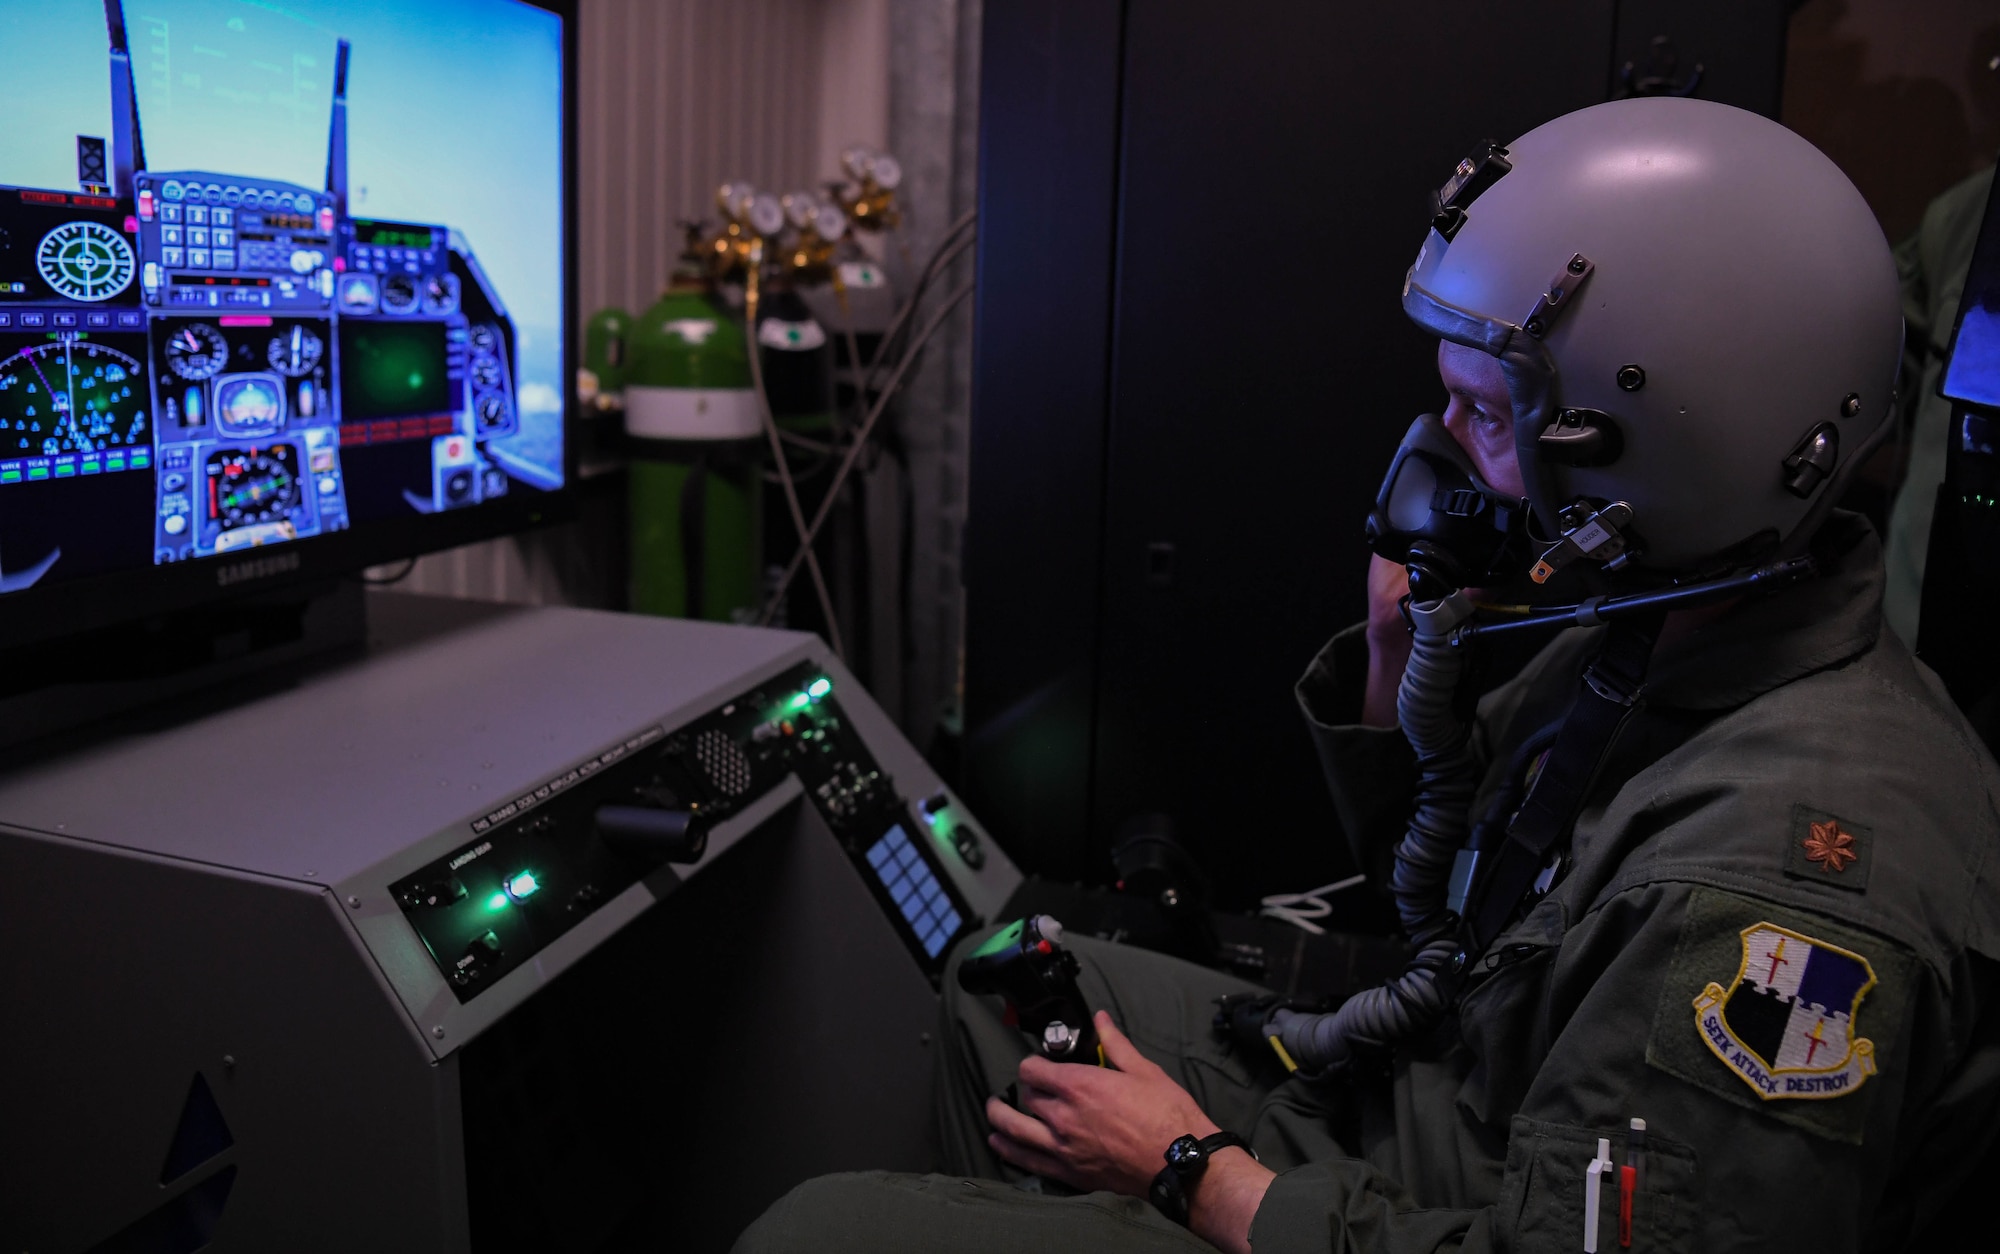 A pilot assigned to the 480th Fighter Squadron at Spangdahlem Air Base, Germany, undergoes physiological refresher training at Ramstein Air Base, Germany, Jan. 27, 2022. The hypoxia familiarization training puts pilots through a simulated flying experience in an unpressurized environment, restricting the amount of oxygen in the cabin. This training allows pilots to become familiar with hypoxia symptoms and emergency procedures that allow them to continue flying the aircraft under these circumstances. (U.S. Air Force photo by Airman 1st Class Jared Lovett)